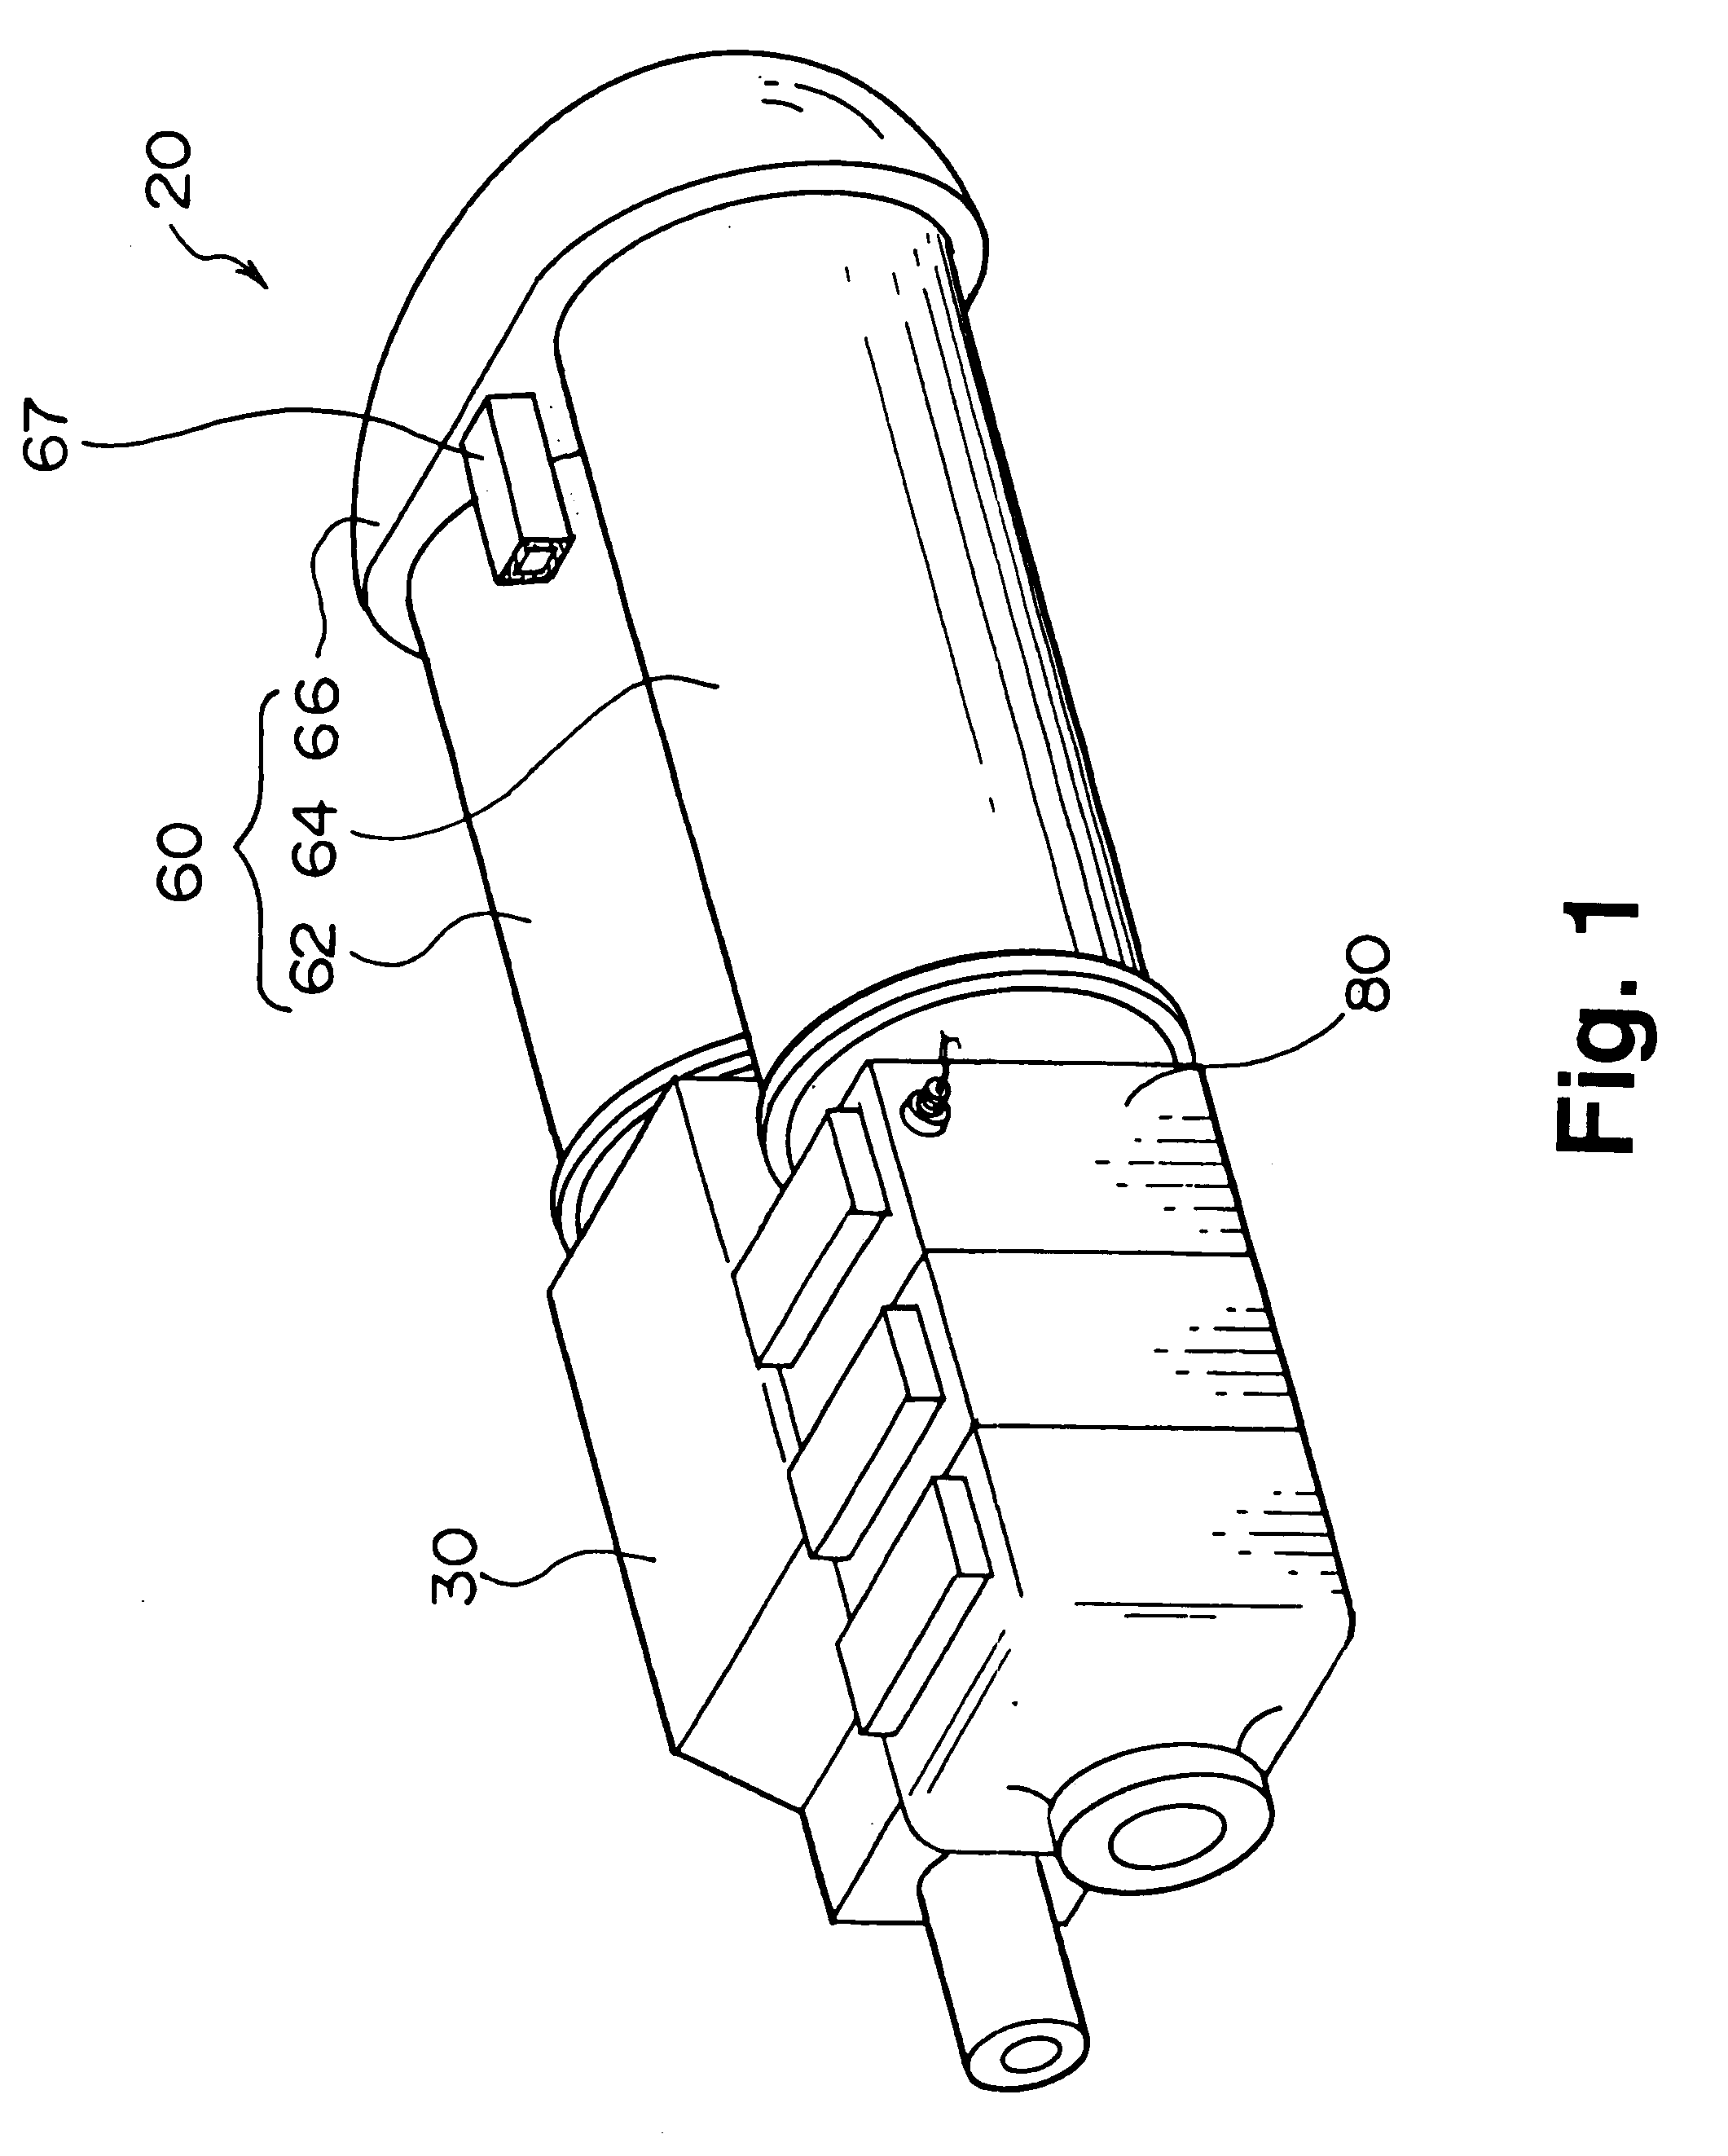 Fuel reformer for mounting on a vehicle